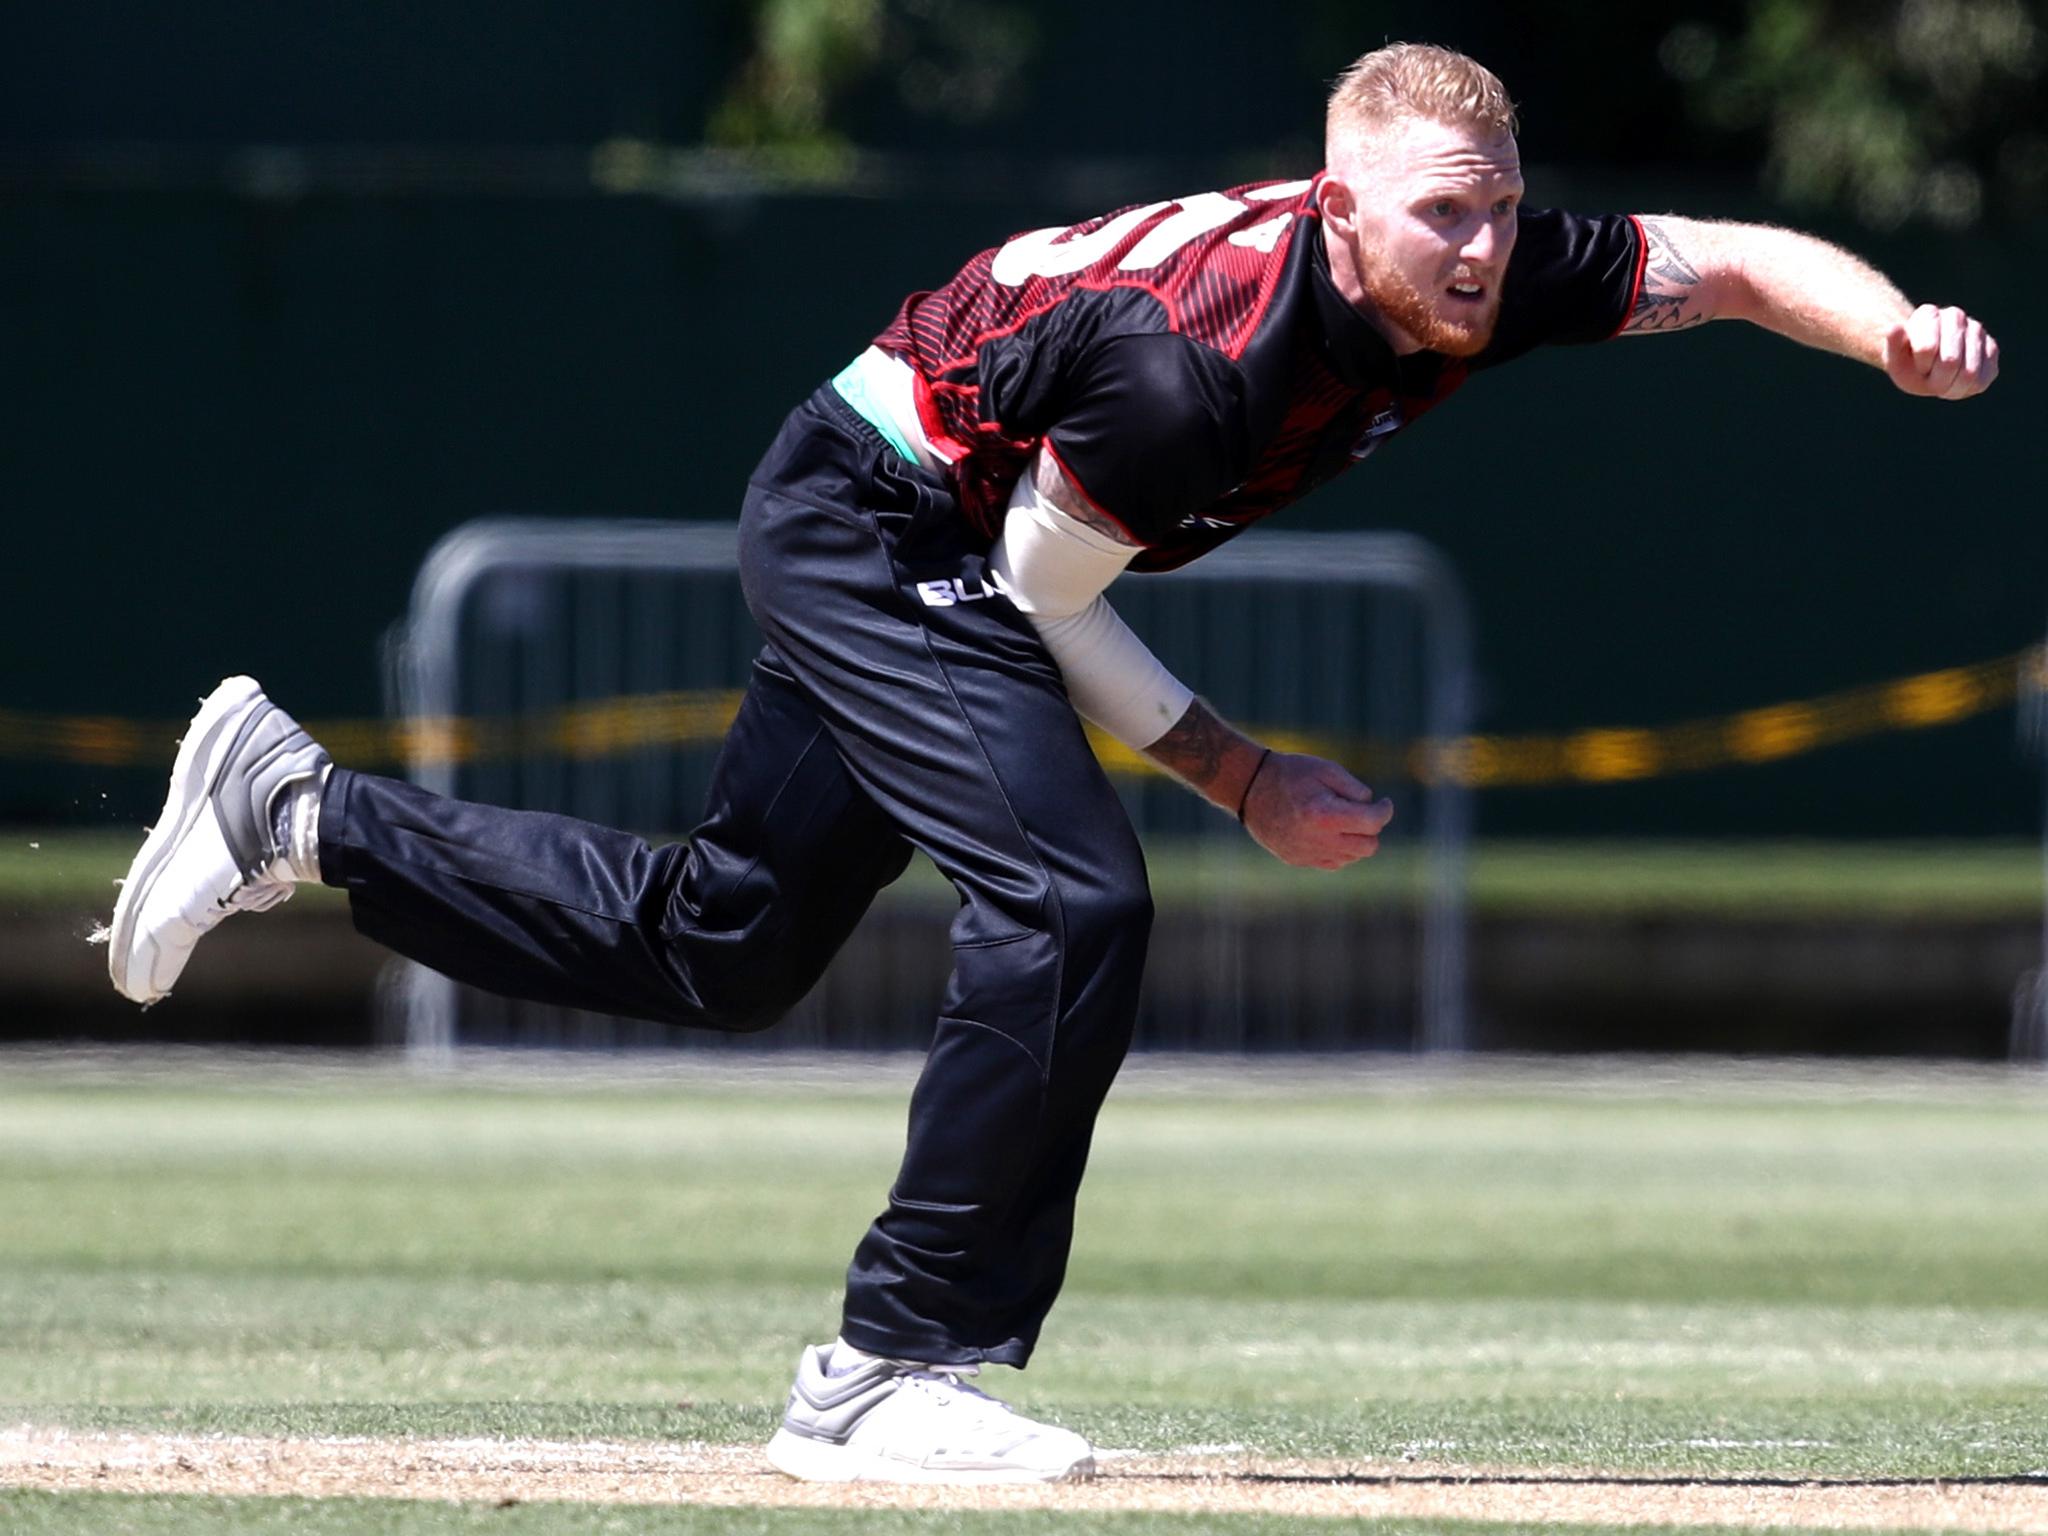 Stokes is currently playing for Canterbury in New Zealand